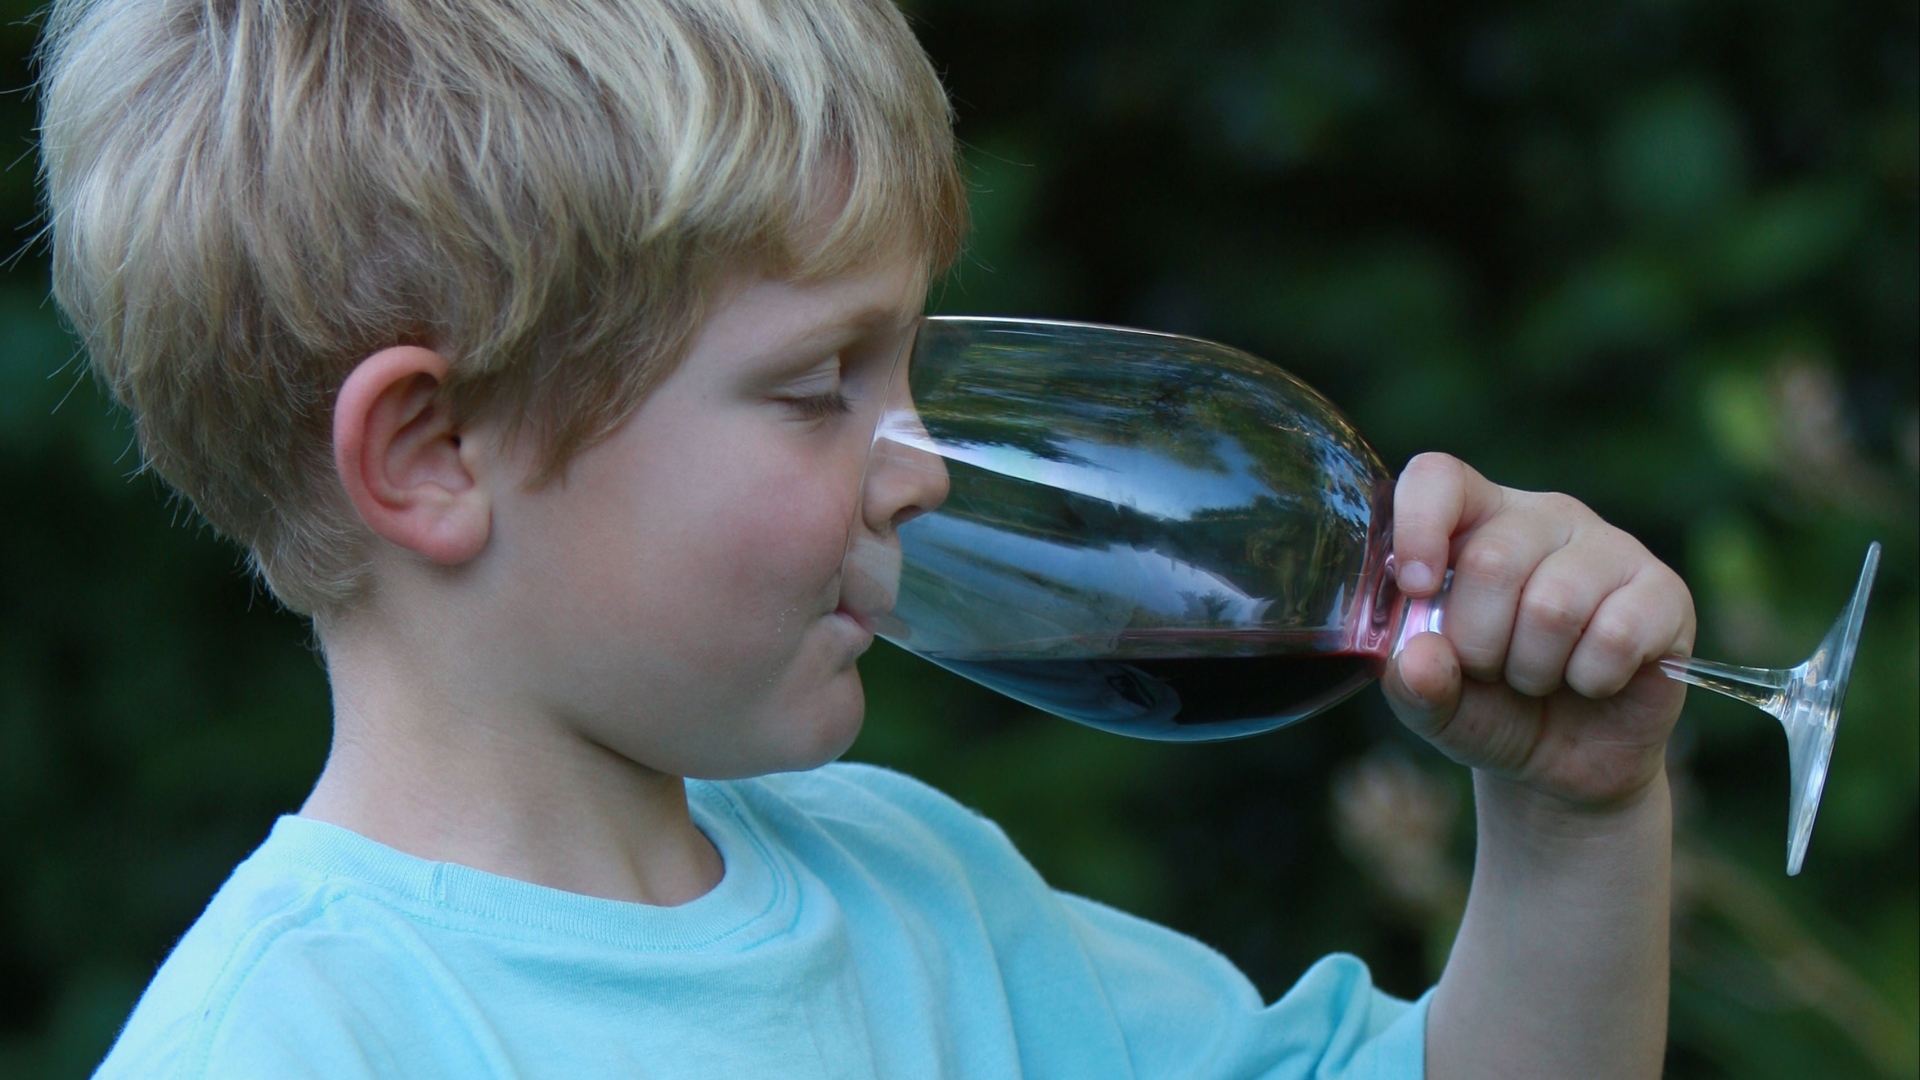 Doctors advise children to avoid alcohol consumption at home and blast the French family drinking myth